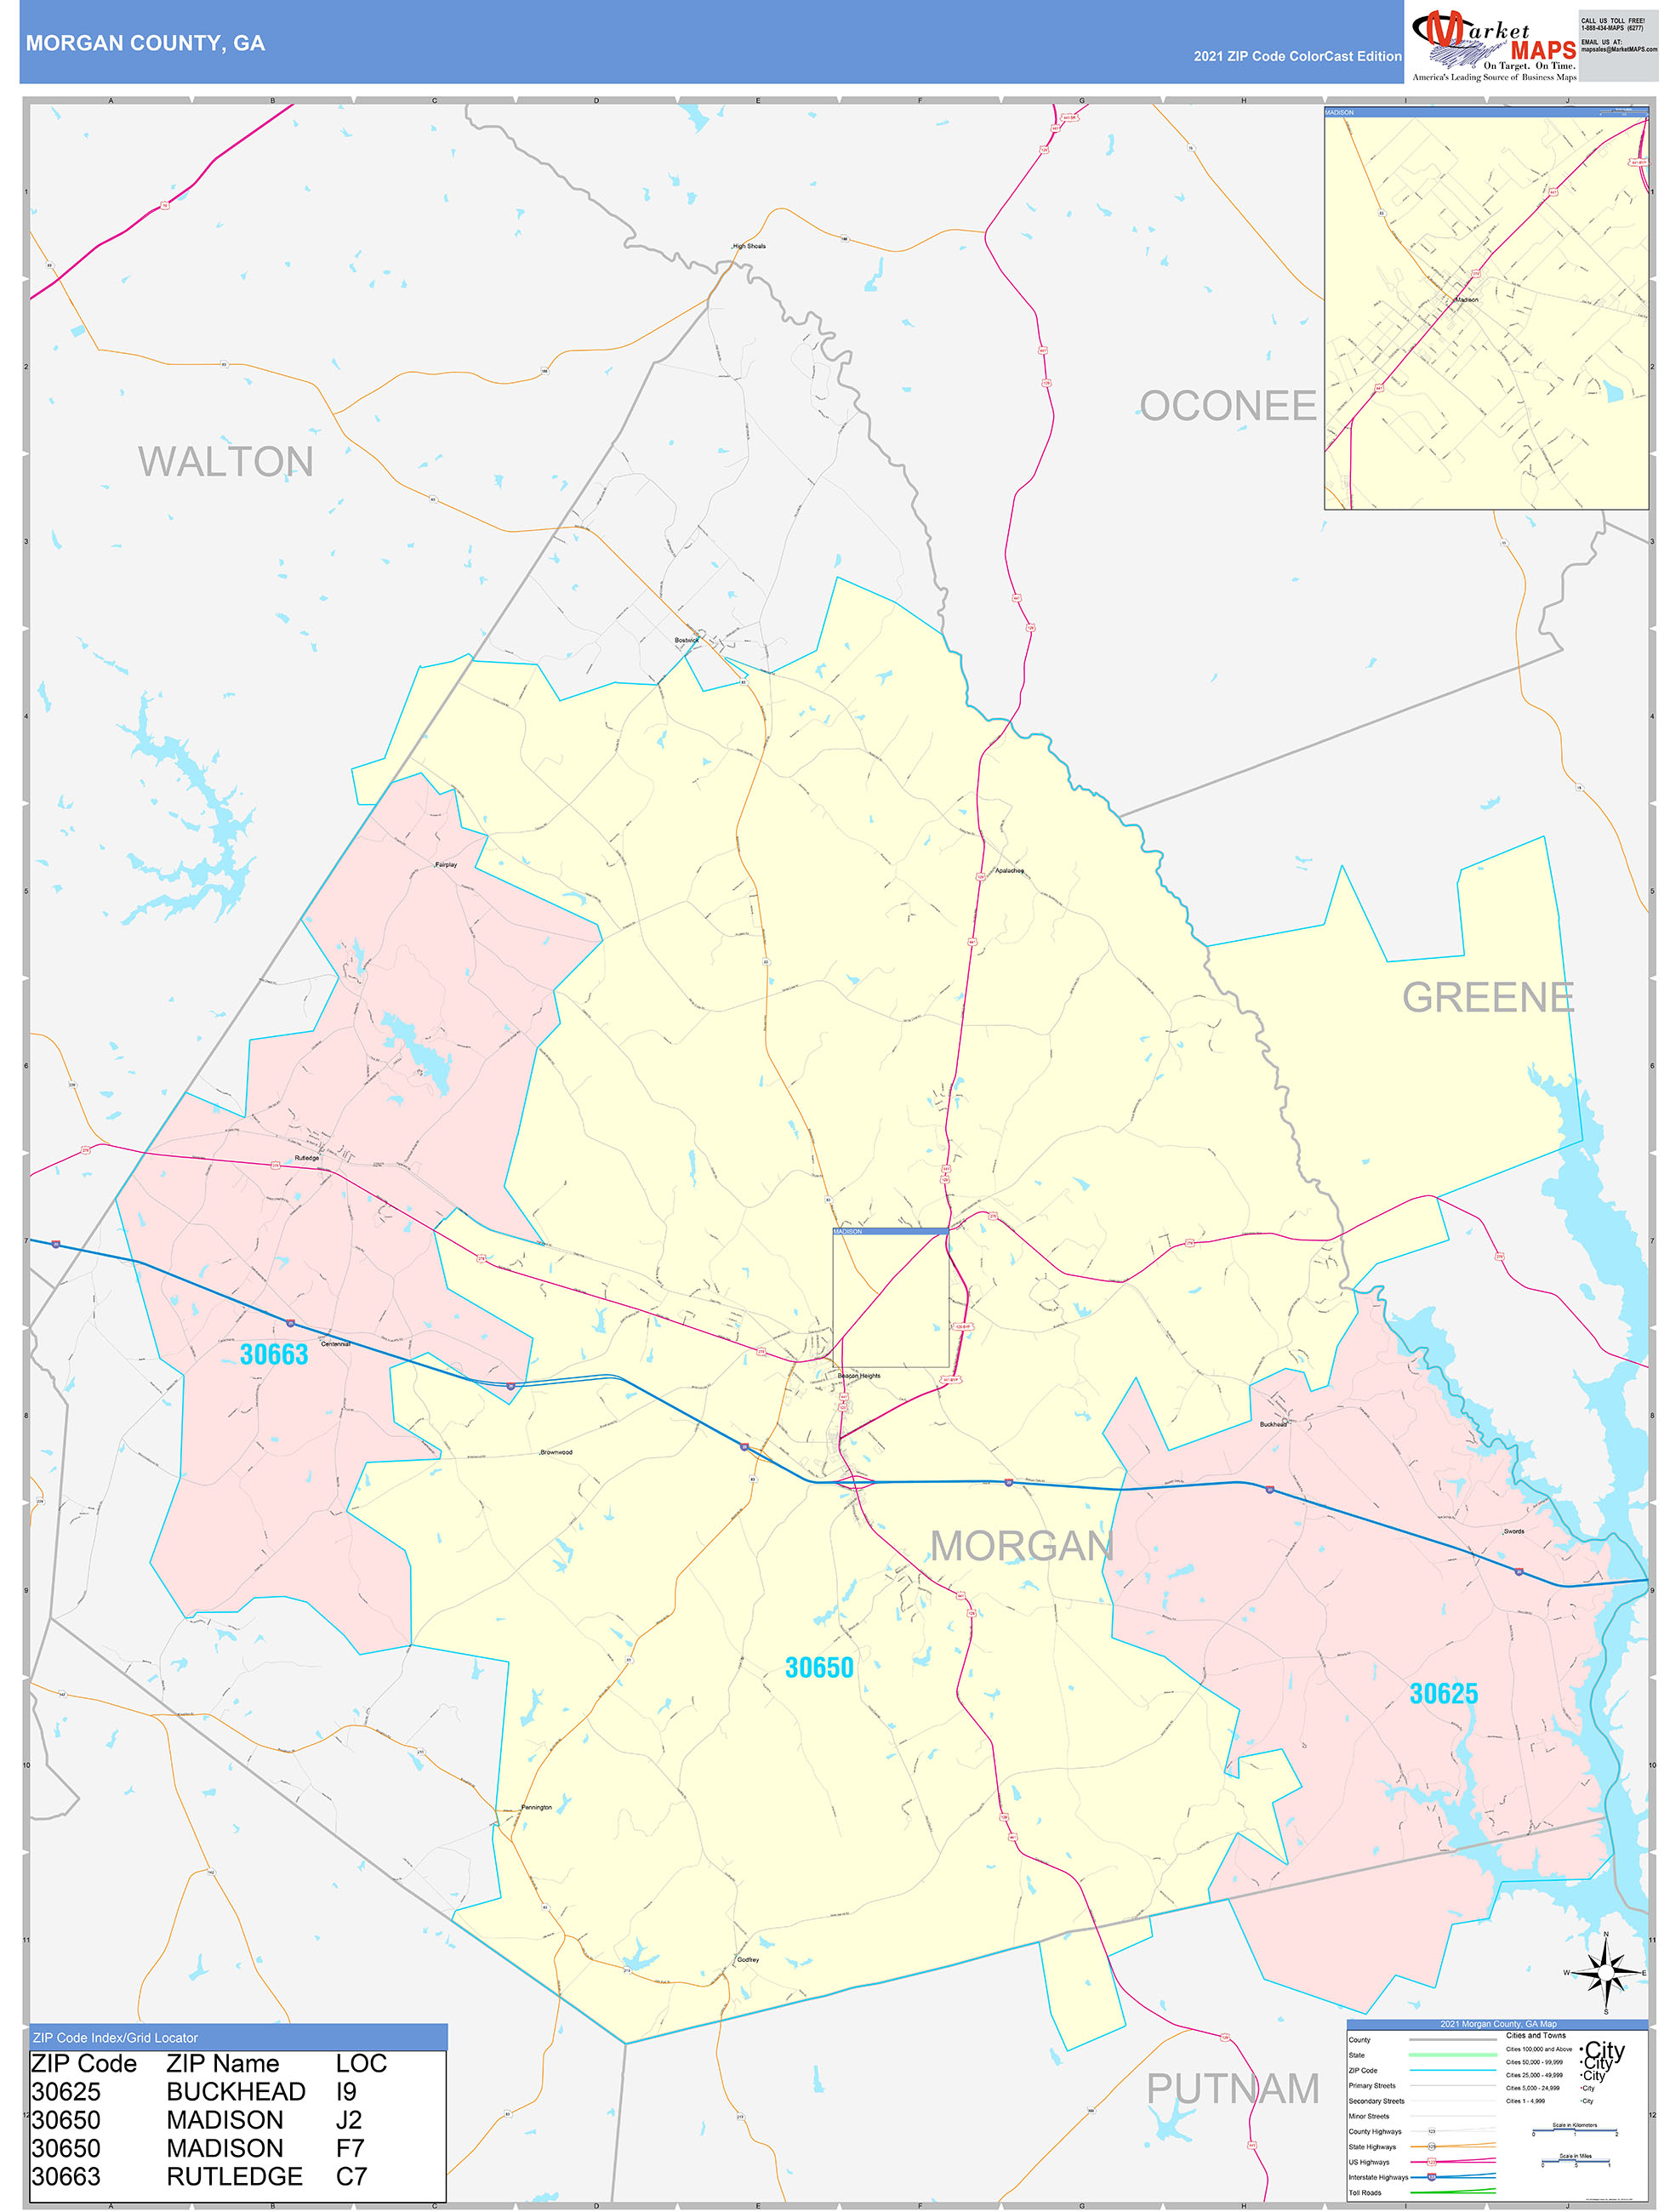 Morgan County, GA Wall Map Color Cast Style by MarketMAPS - MapSales